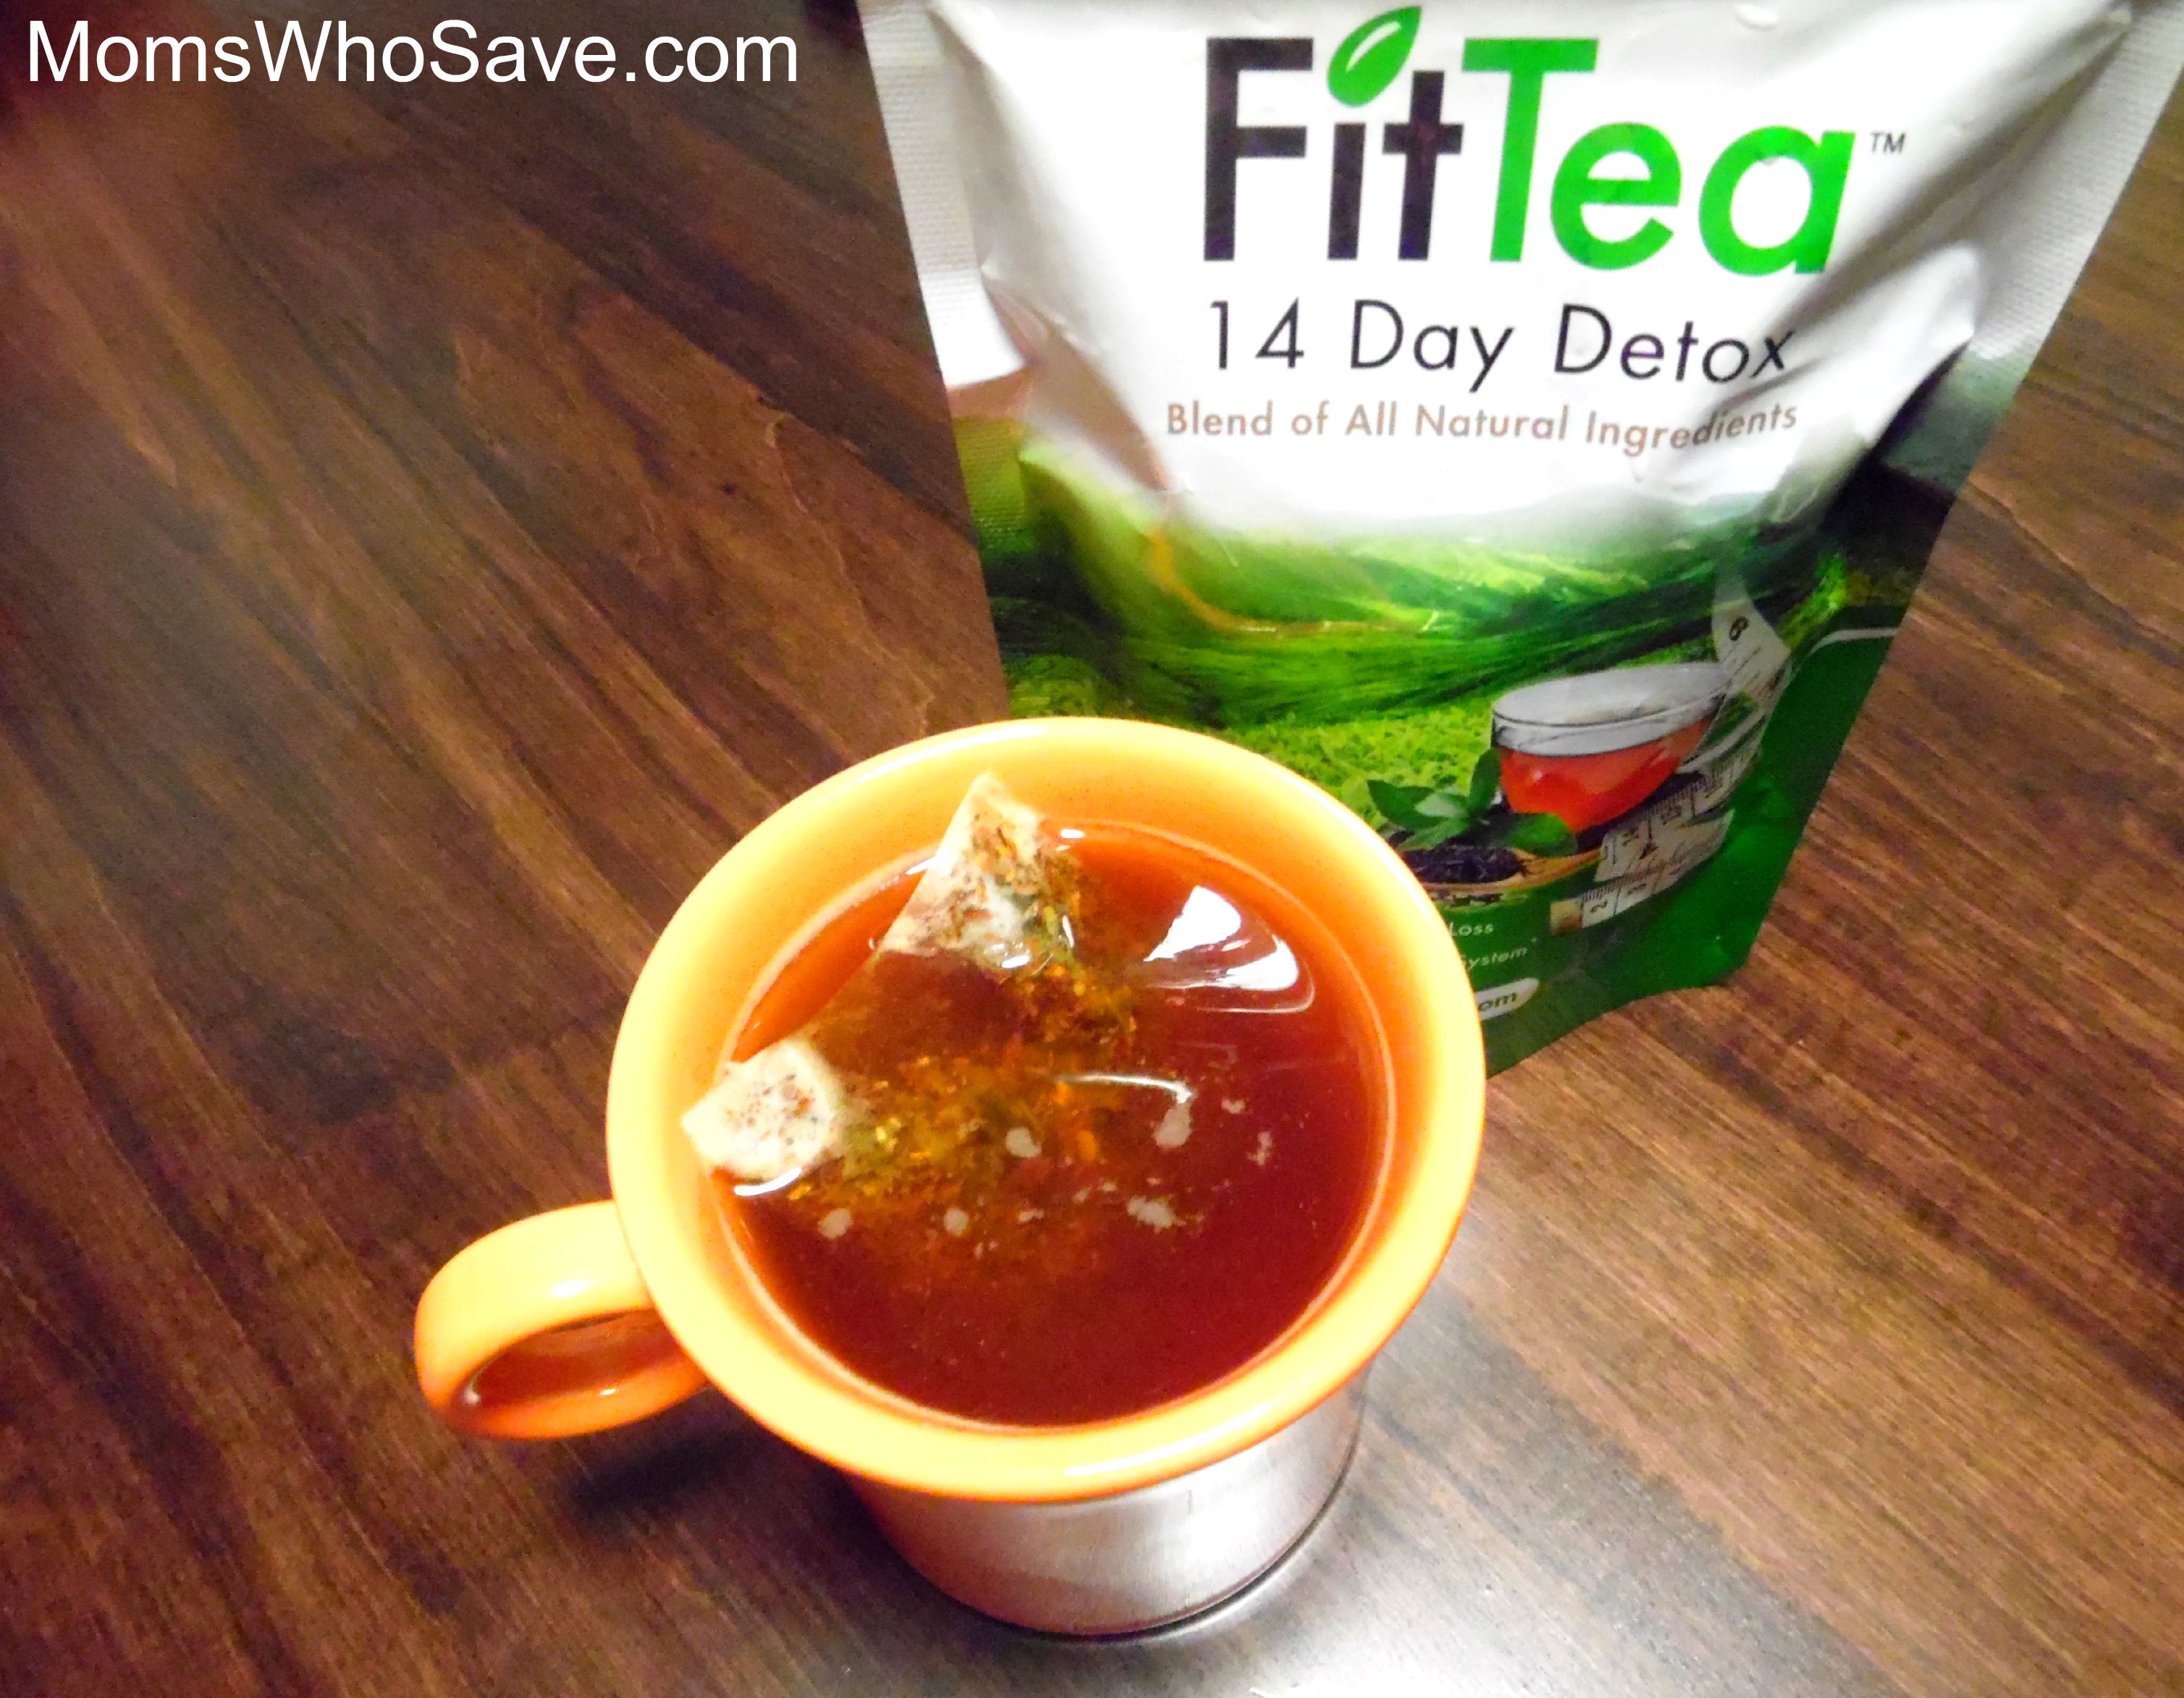 FitTea review